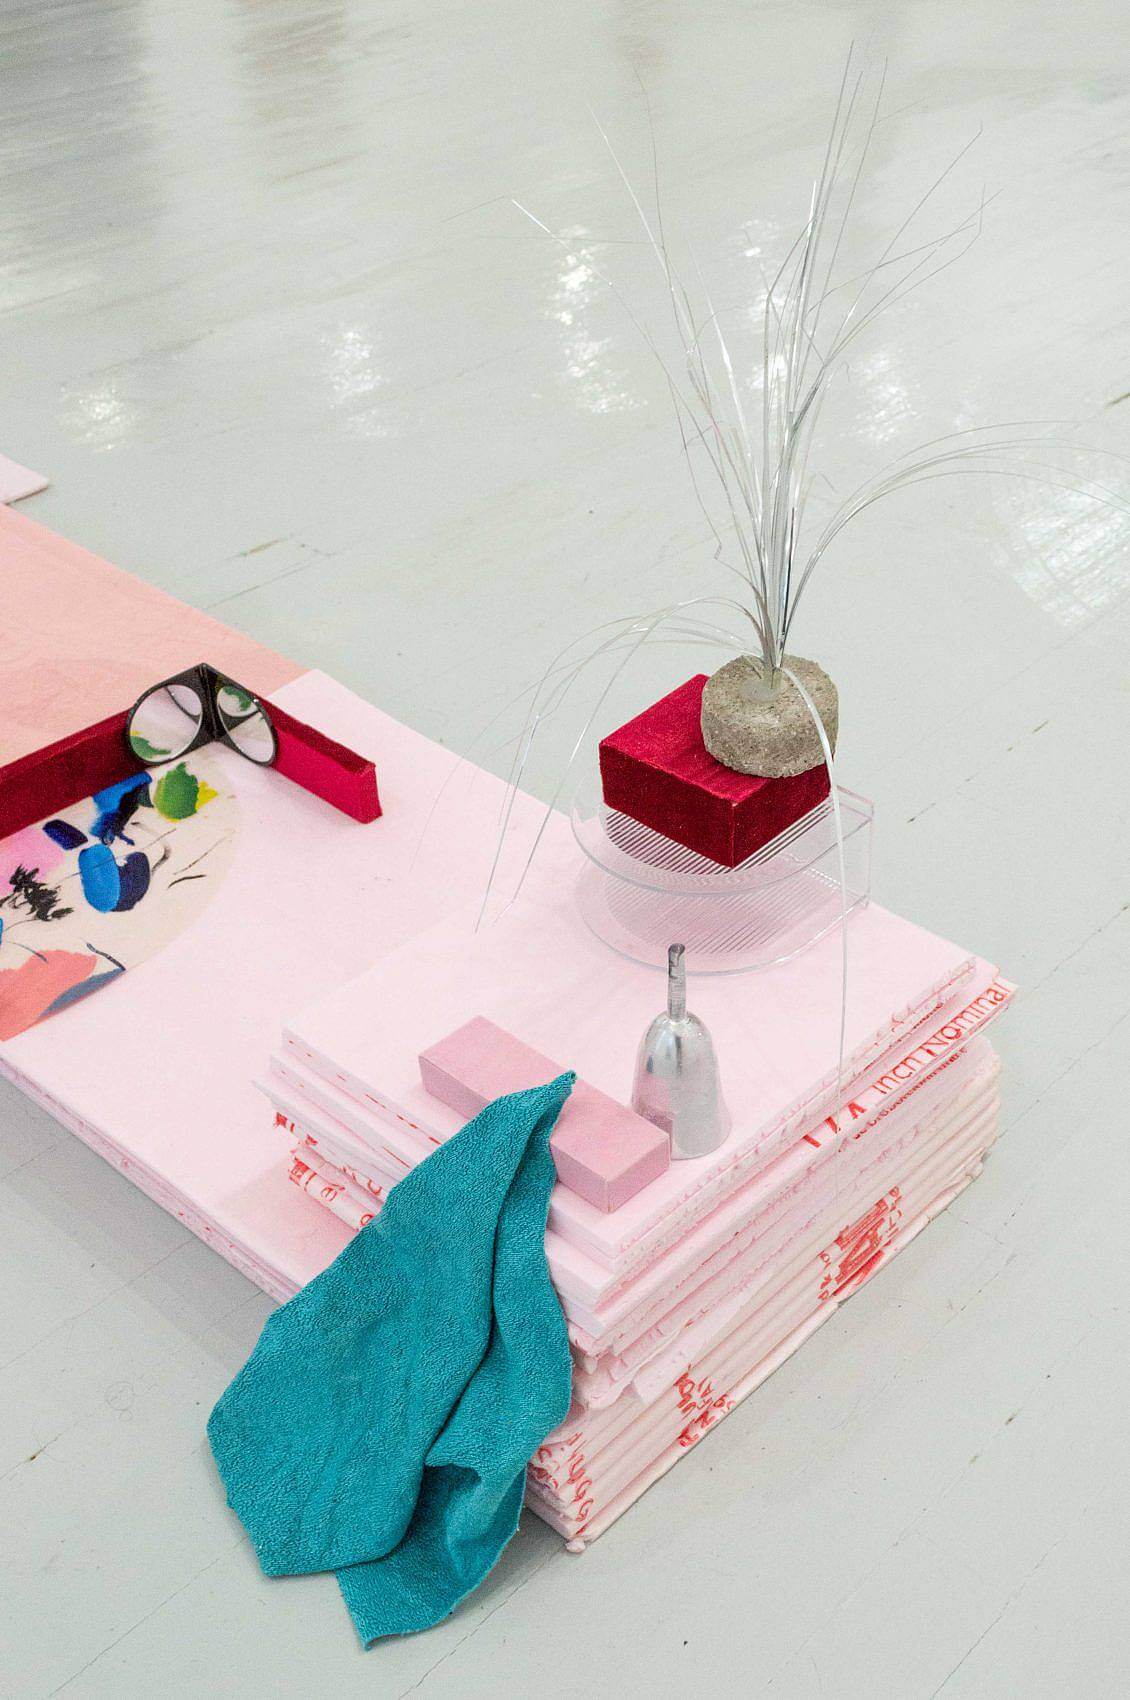 Leaning against against a stack of square thin sheets of pink foam is a blue rag pulled up to the top. There is also a transparent half-oval shaped napkin holder with a red velvet block on top. On top of the block is a short cylinder of cement with silver tinsel poking out of the top.